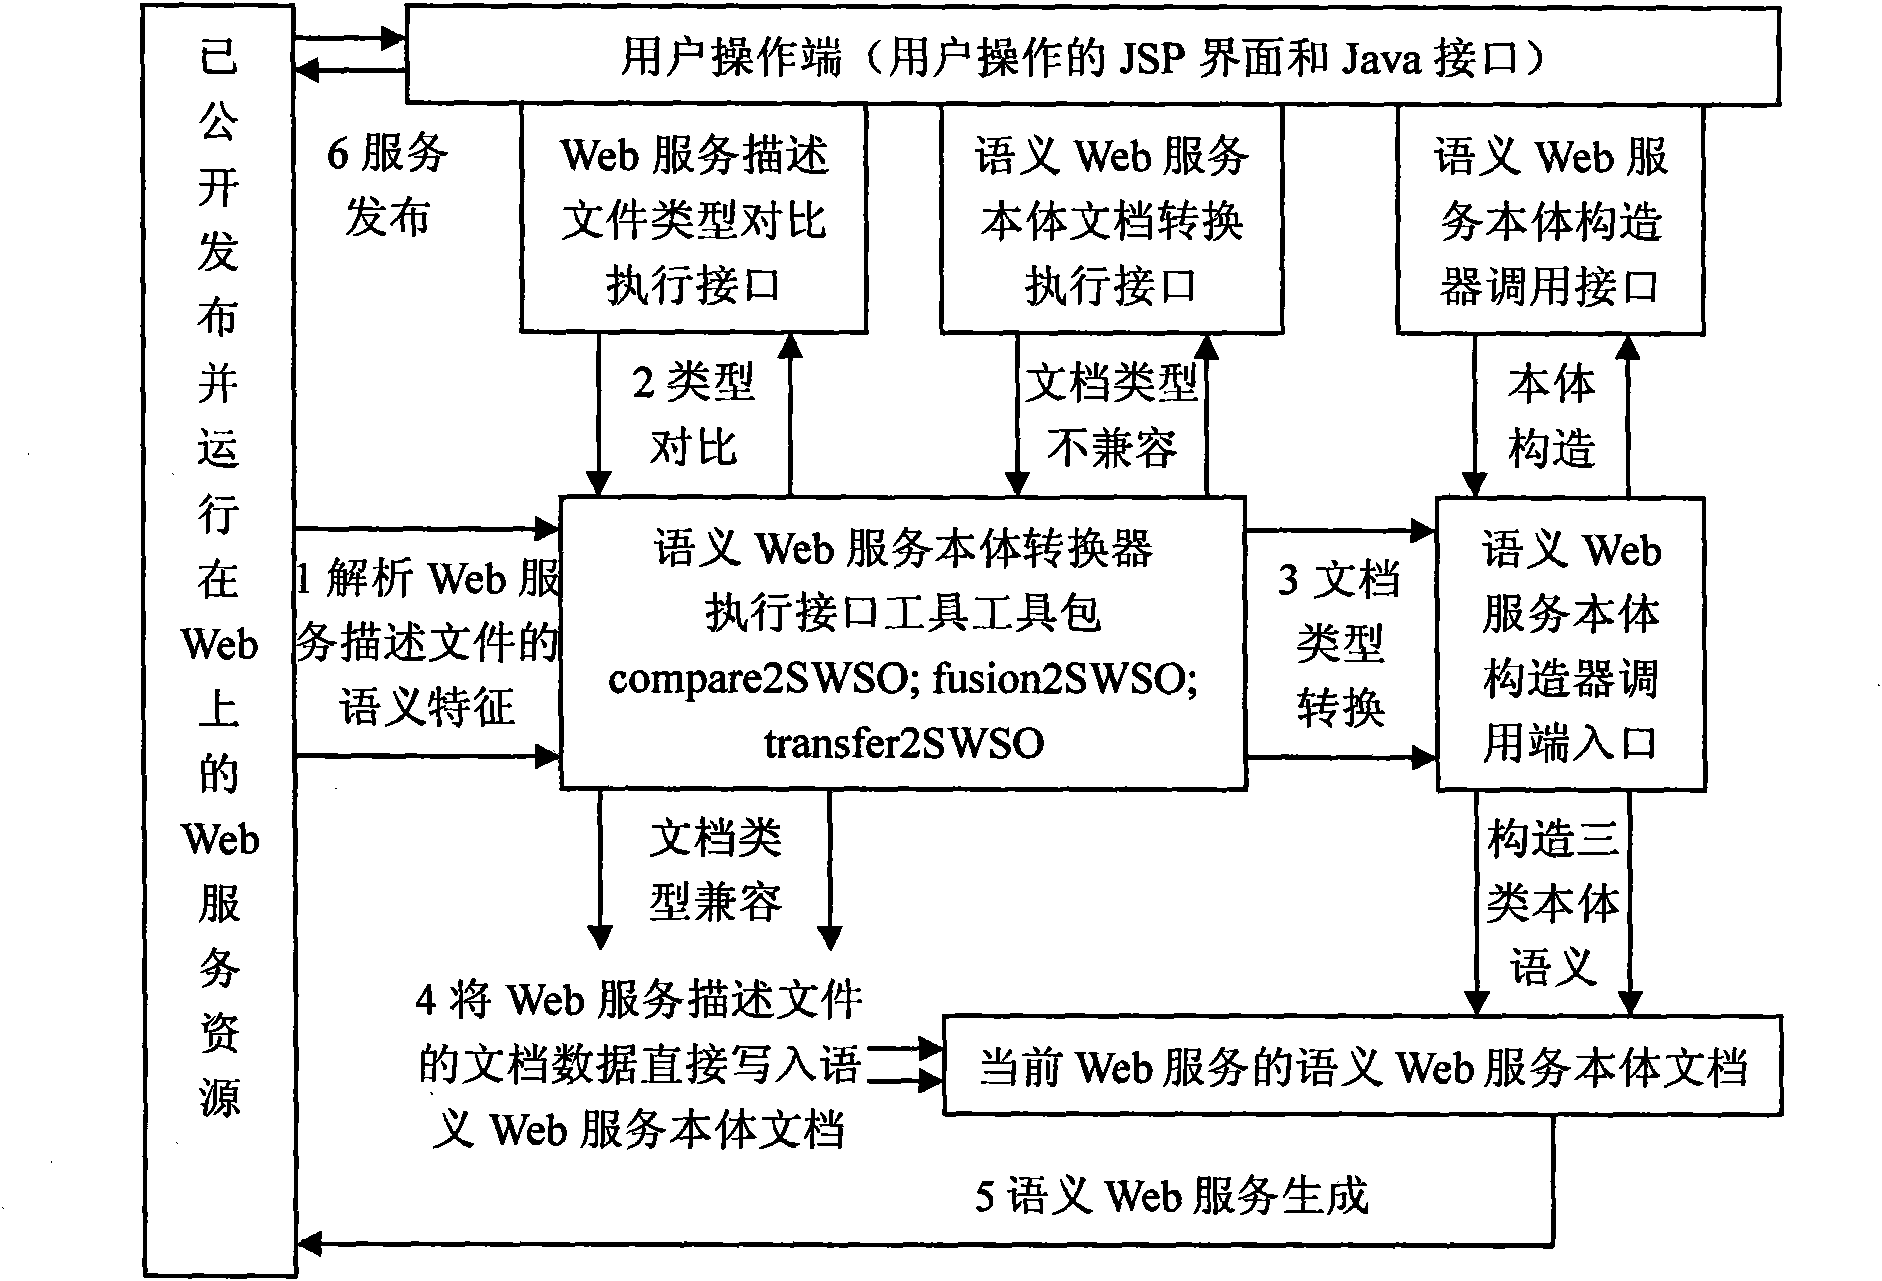 Semantic Web service body and application thereof